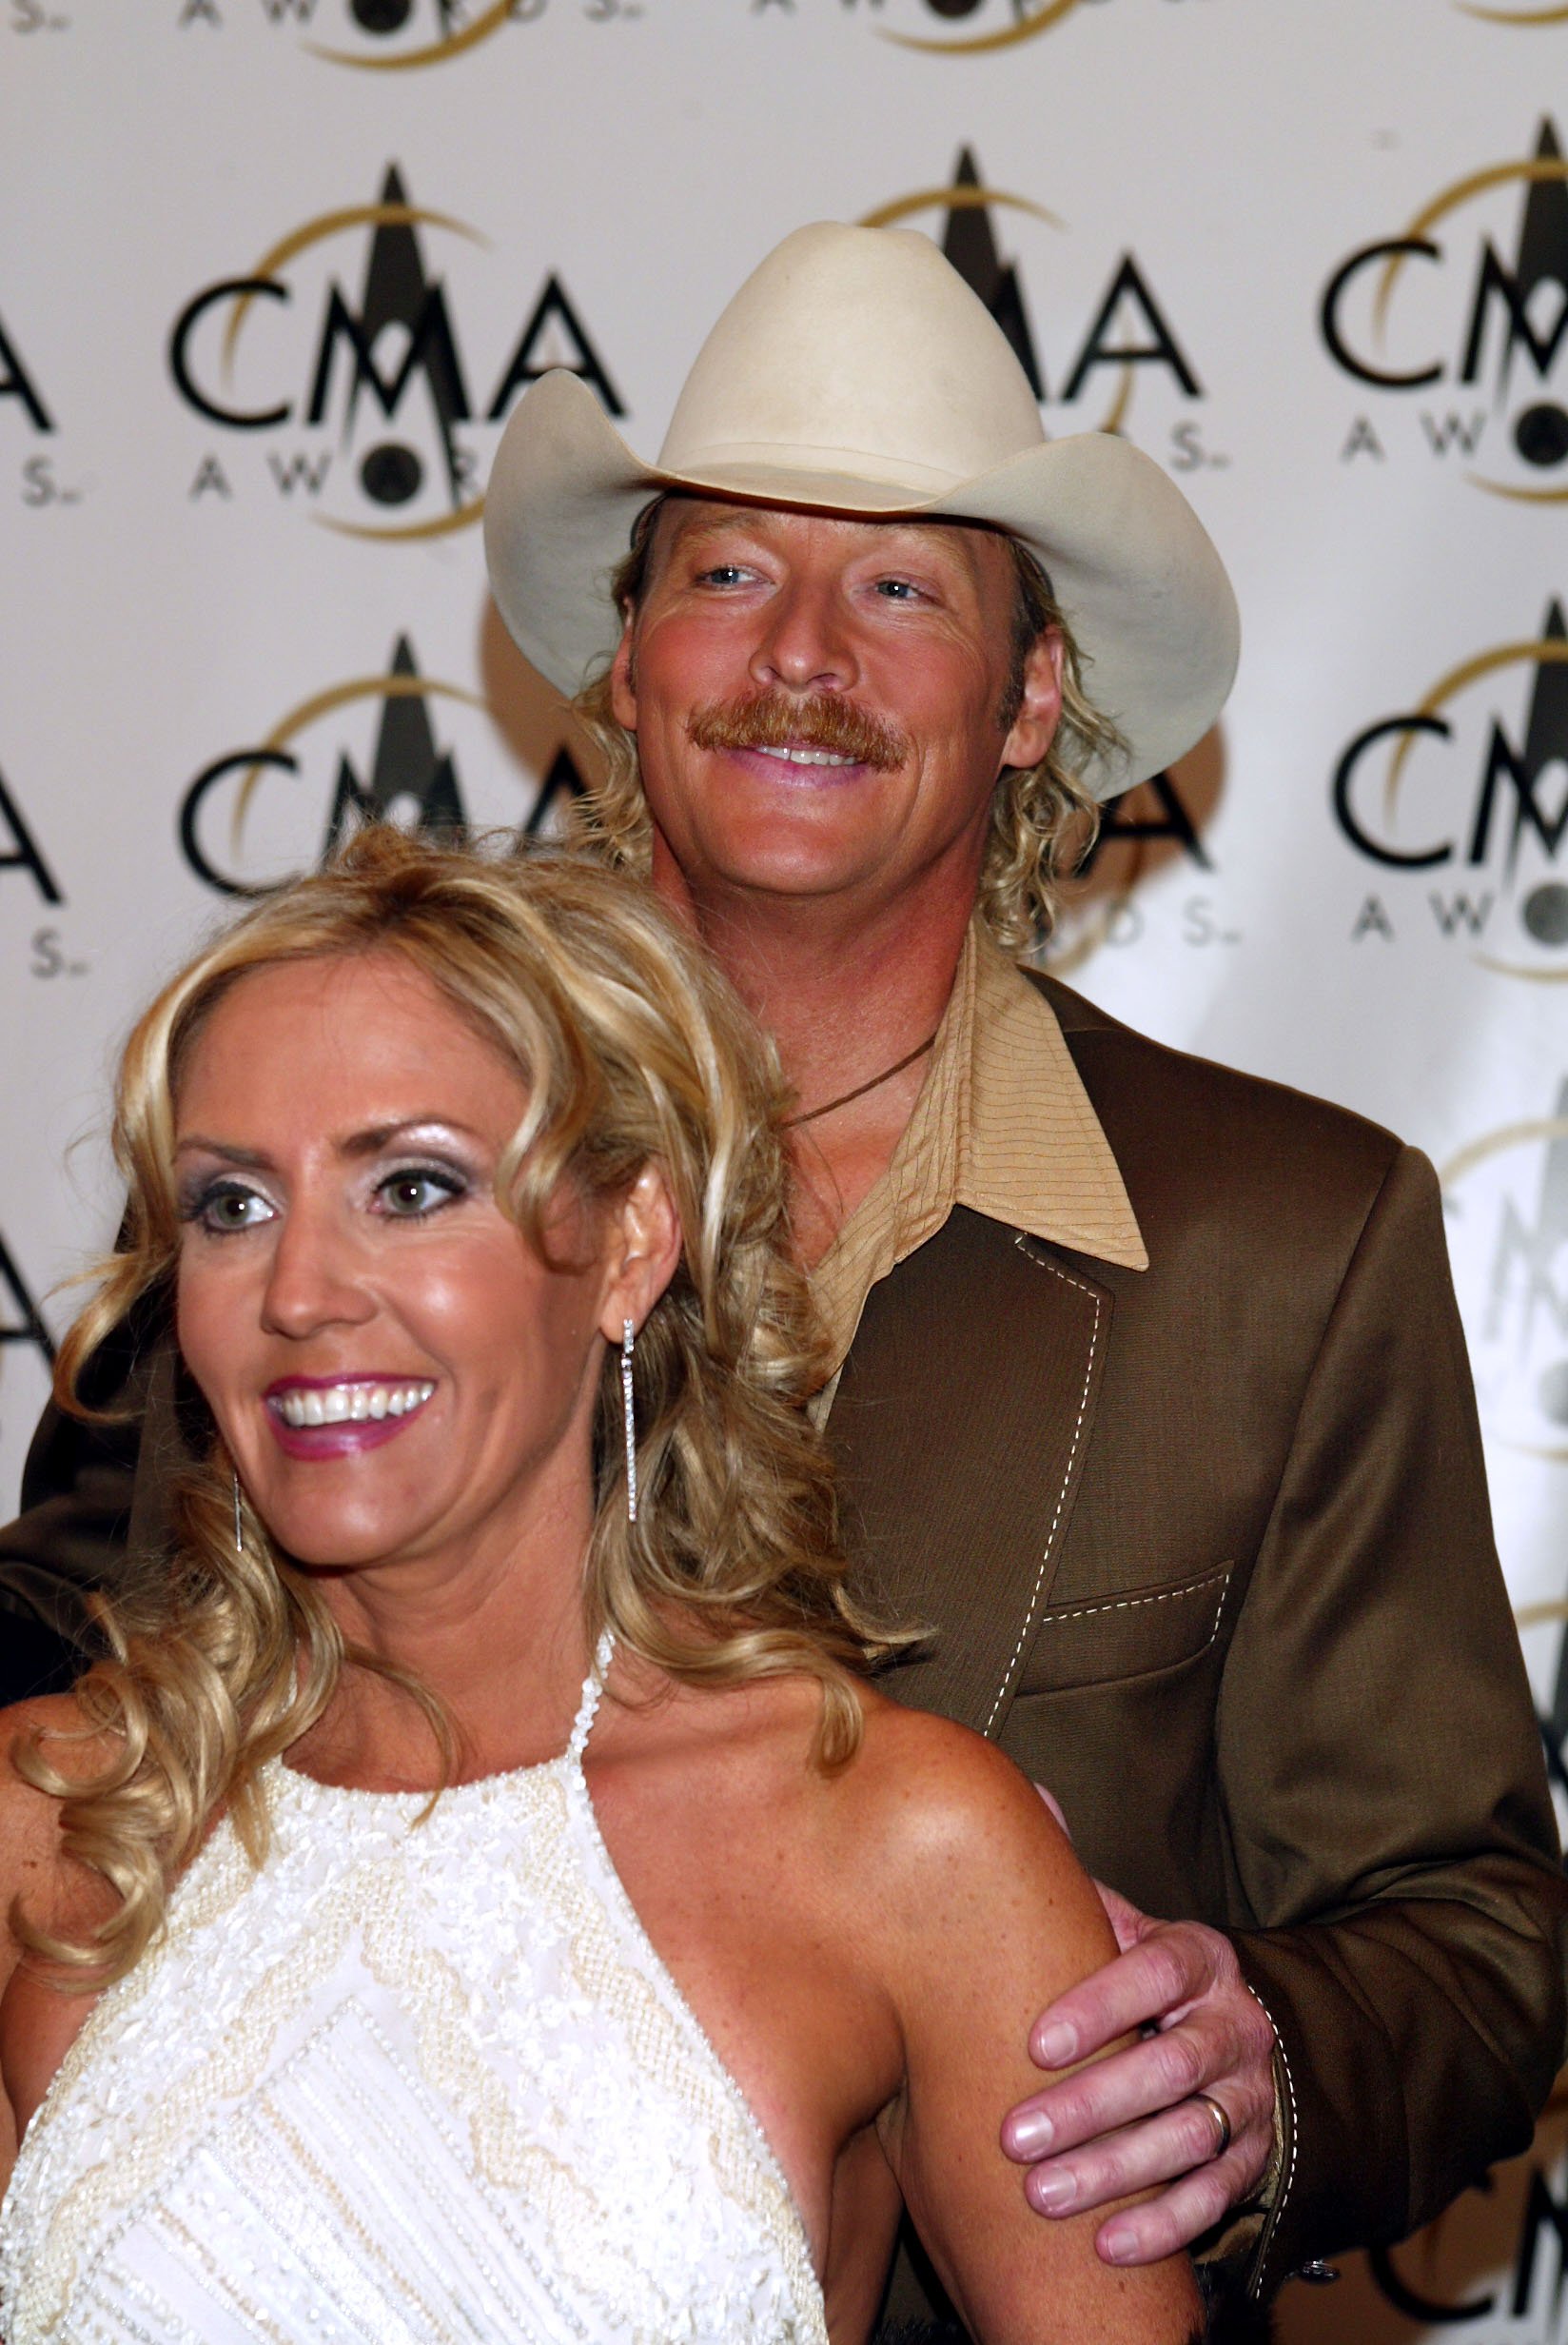 Alan Jackson arrives with his wife Denise at the 36th annual Country Music Association Awards at the Grand Ole Opry House in Nashville, Tennessee, November 6, 2002 | Source: Getty Images